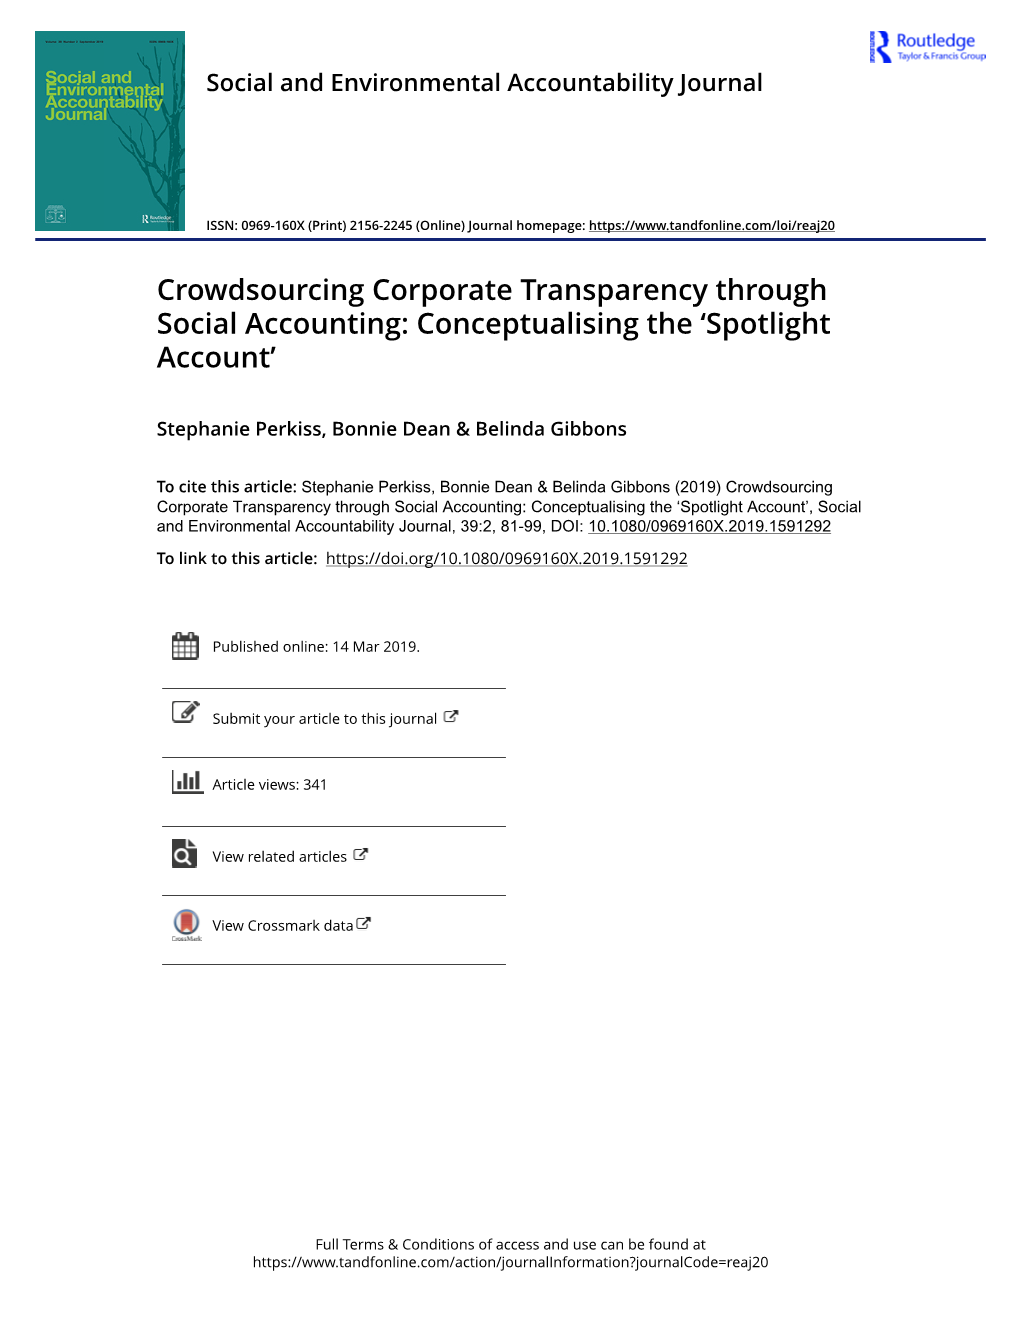 Crowdsourcing Corporate Transparency Through Social Accounting: Conceptualising the ‘Spotlight Account’